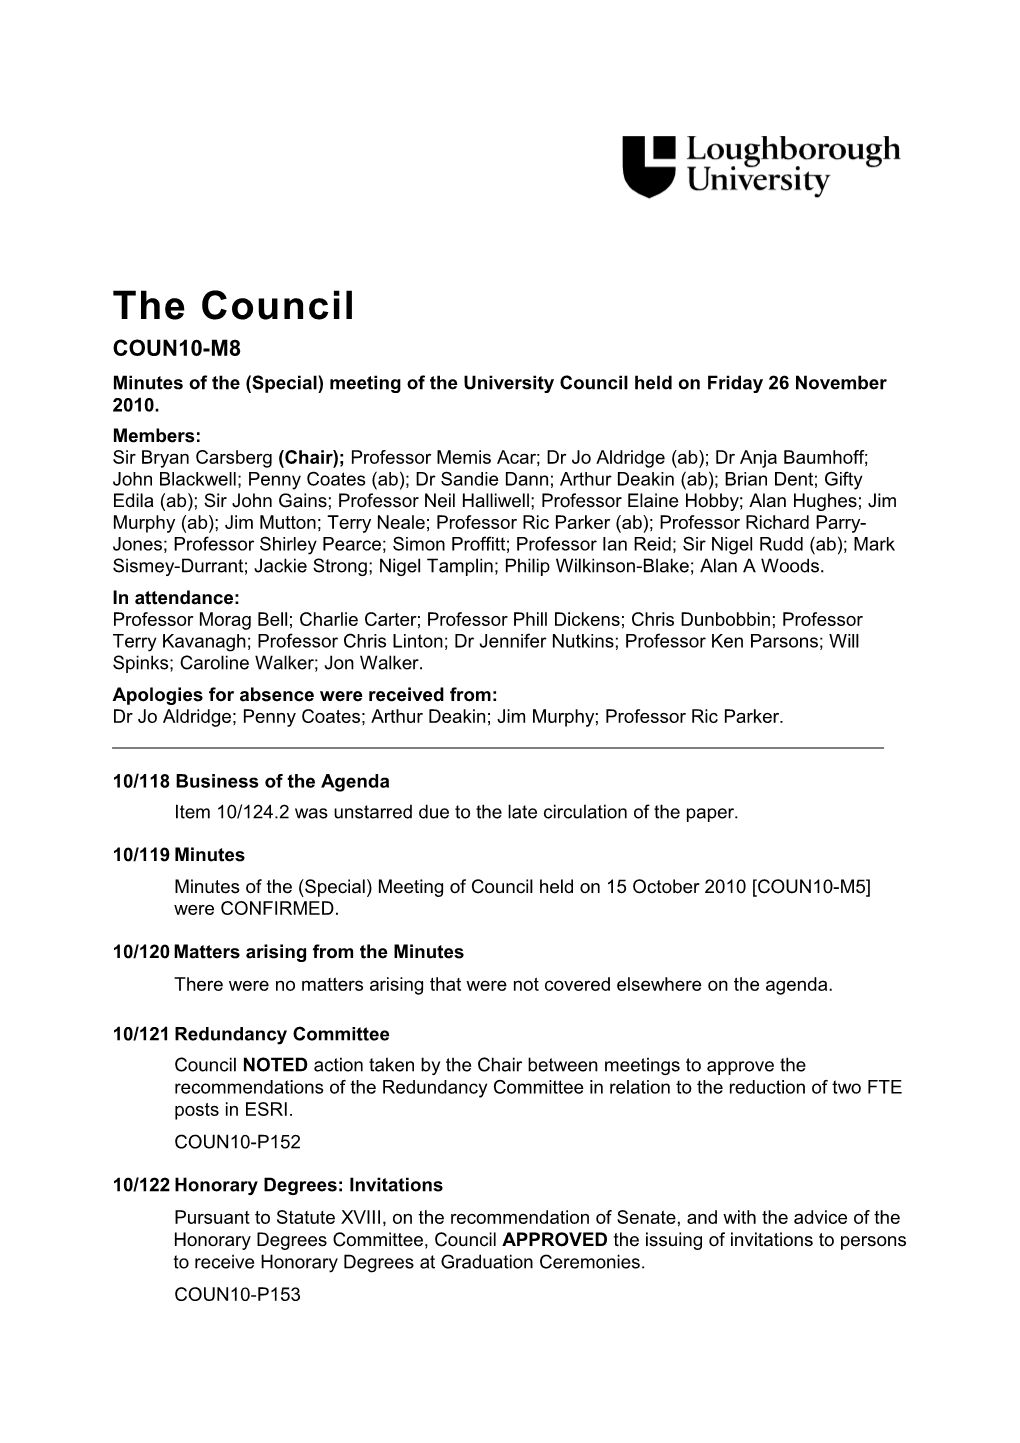 Minutes of the (Special) Meeting of the University Council Held on Friday26 November 2010